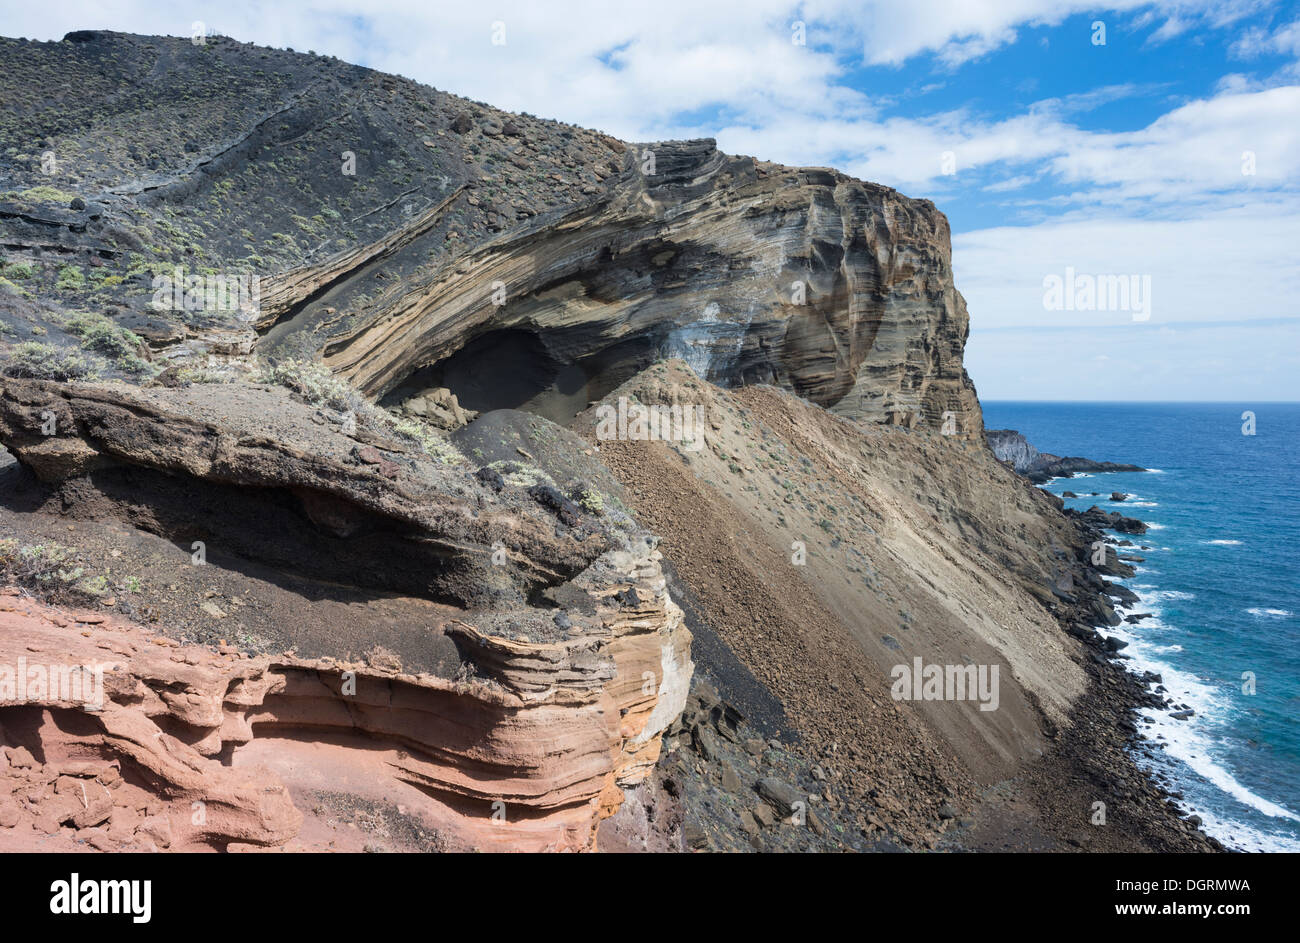 Goteras Volcano, La Palma, Canary Islands, is a hydrovolcanic cone, formed by explosive interaction of magma and seawater Stock Photo